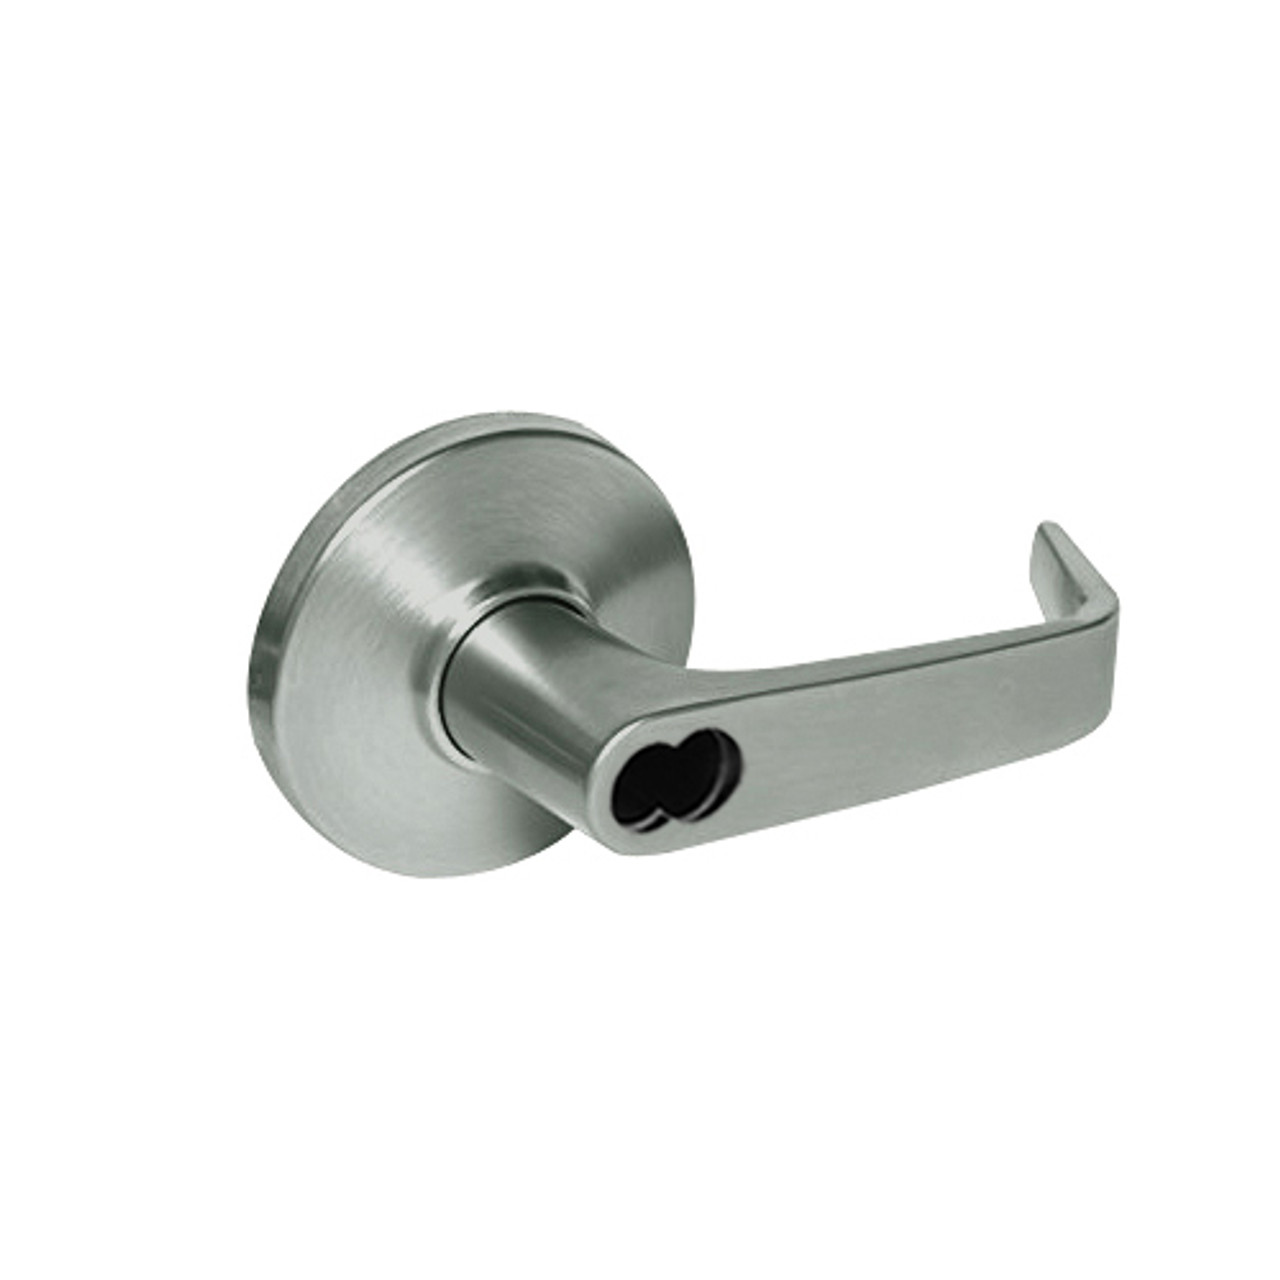 9K37T15DSTK619 Best 9K Series Dormitory Cylindrical Lever Locks with Contour Angle with Return Lever Design Accept 7 Pin Best Core in Satin Nickel